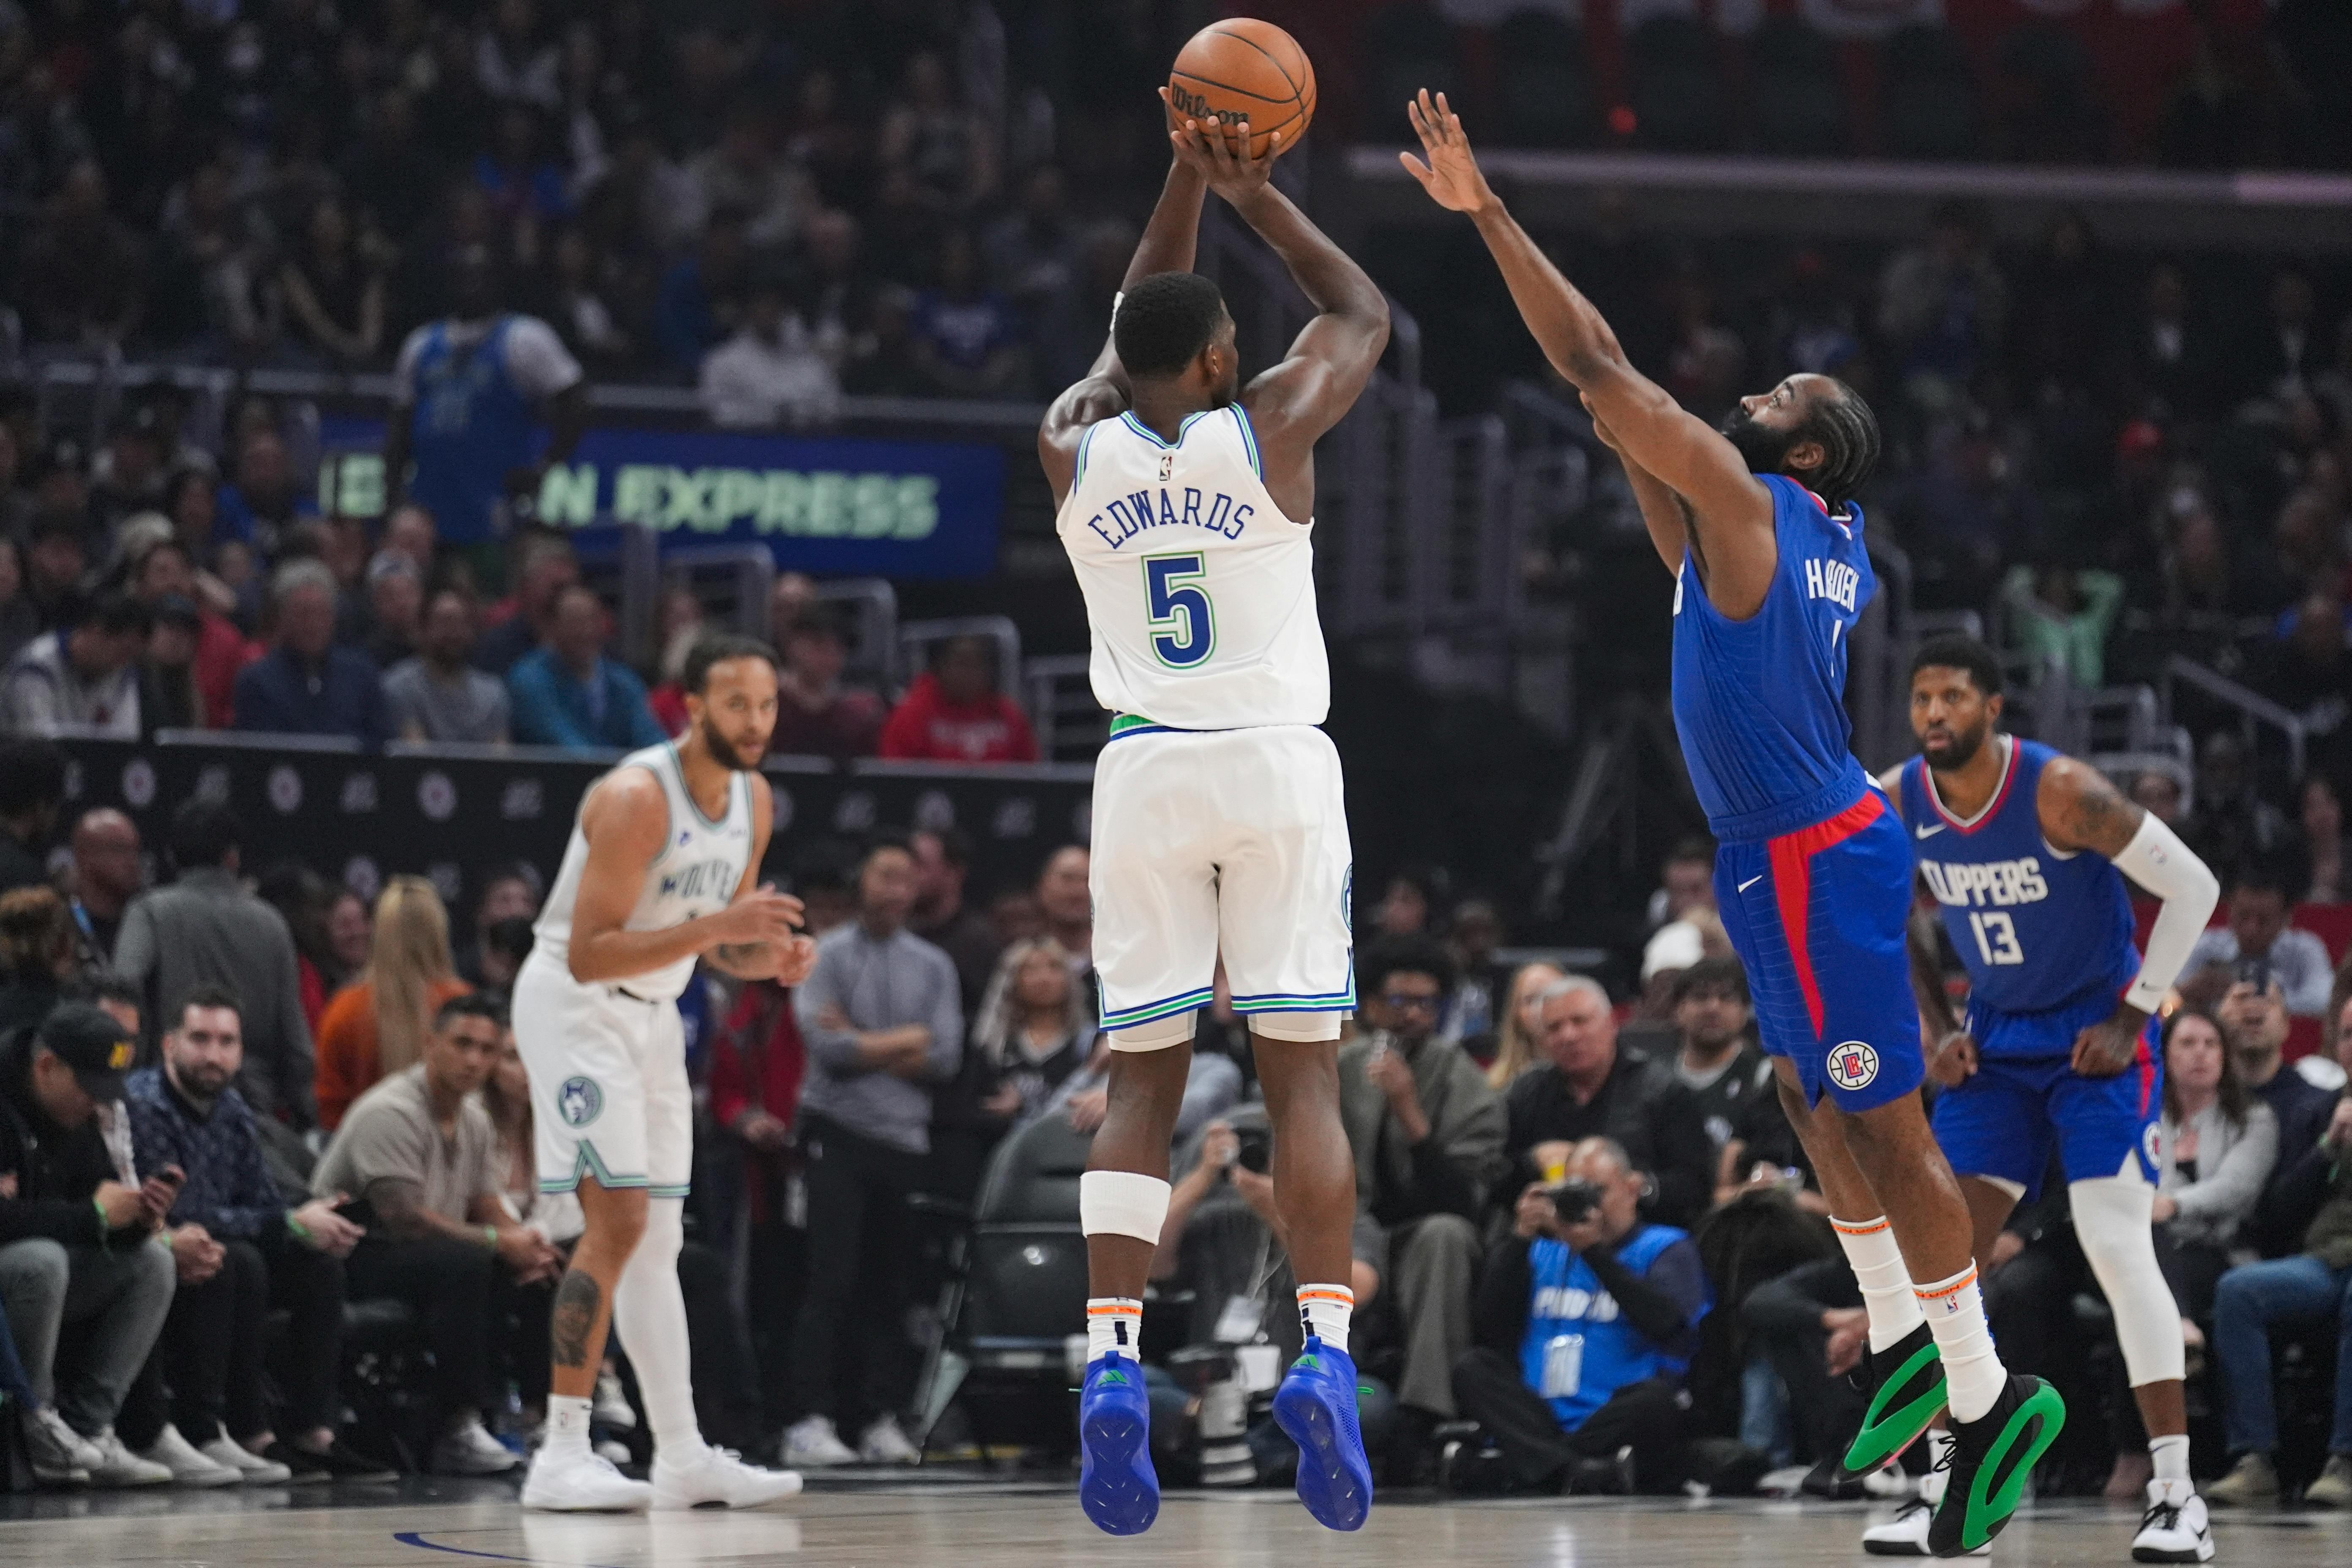 Timberwolves beat Clippers 118-100 after making biggest comeback since 2012